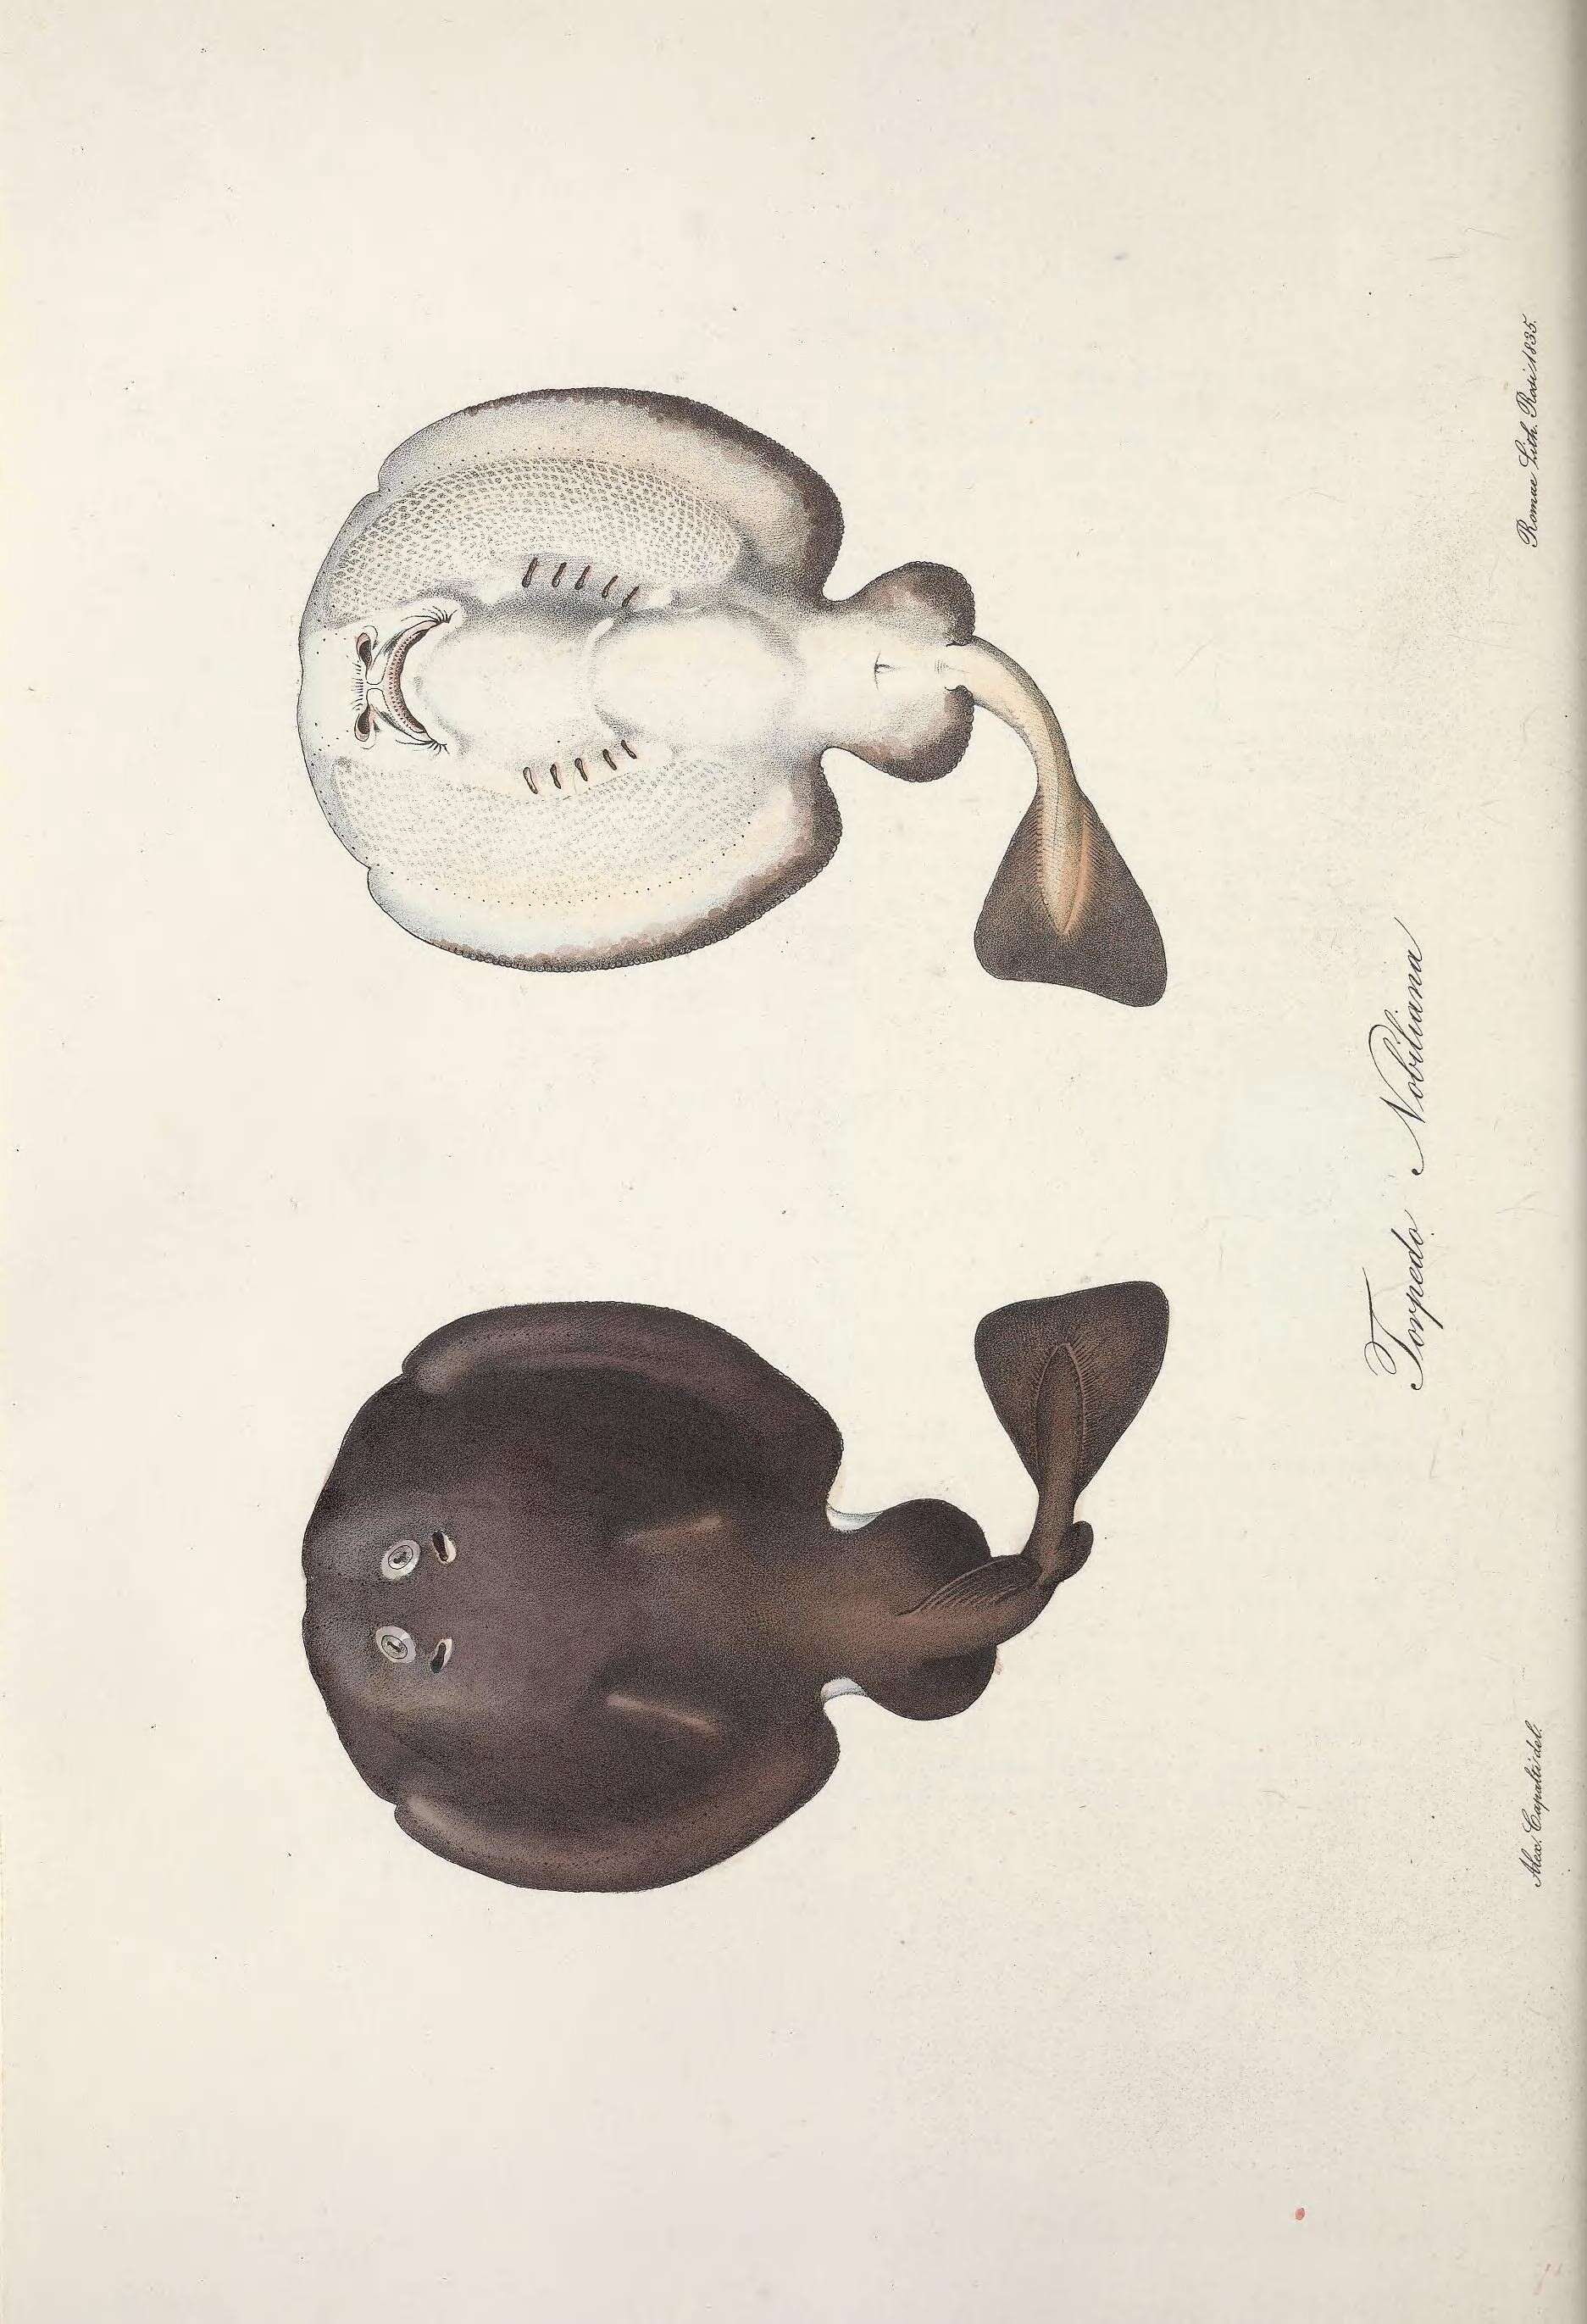 Image of electric ray